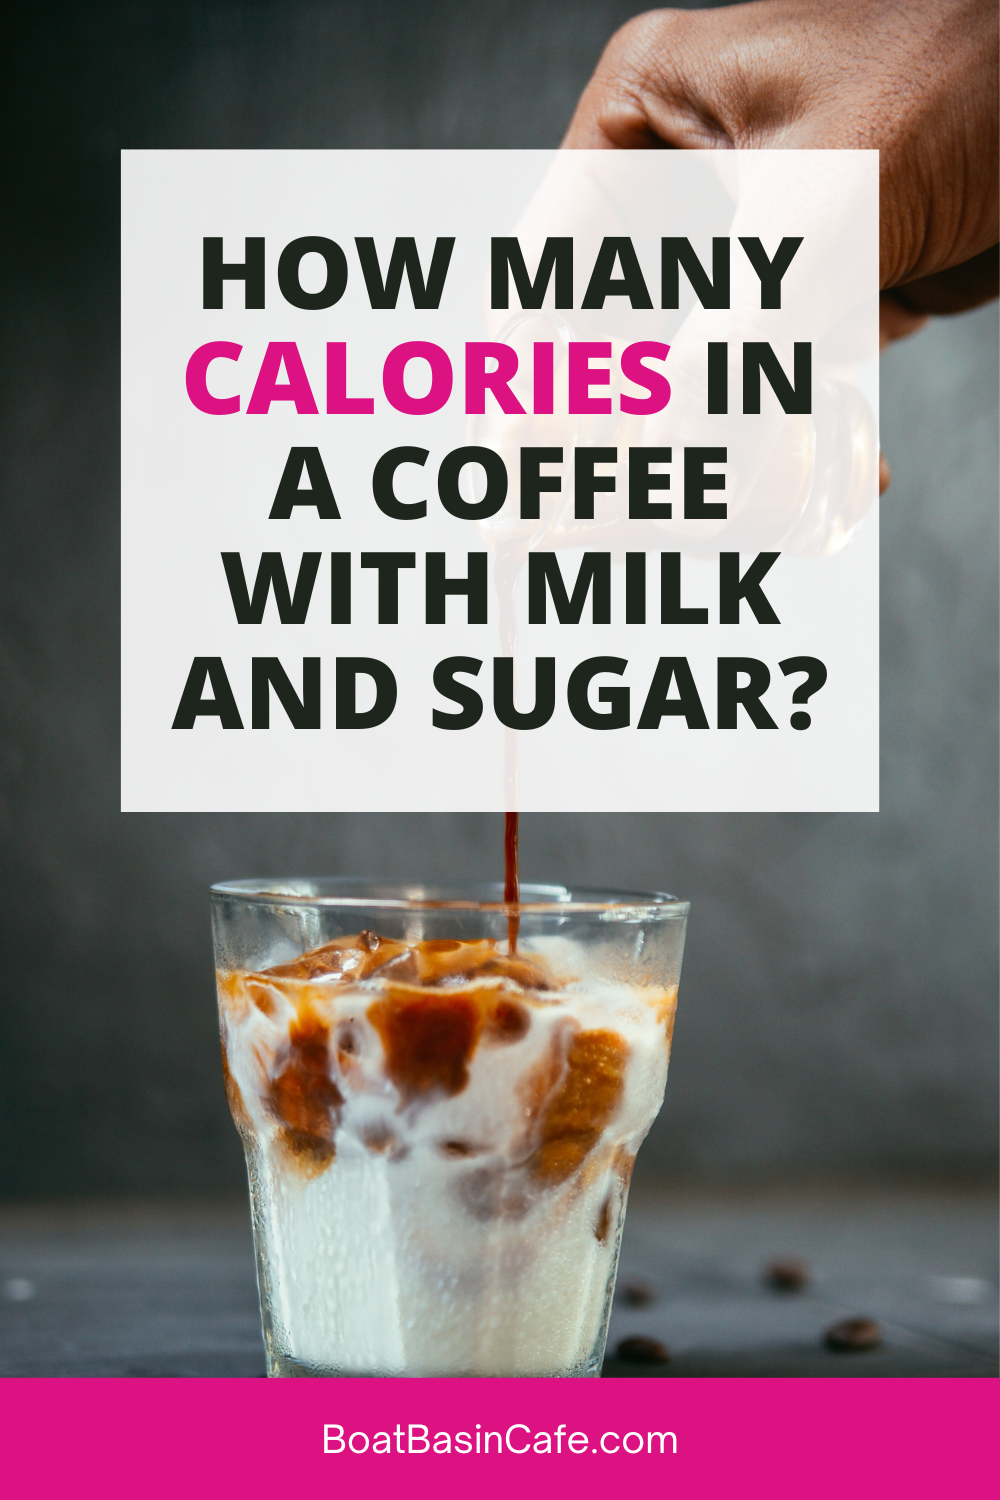 How many calories in a coffee with milk and sugar